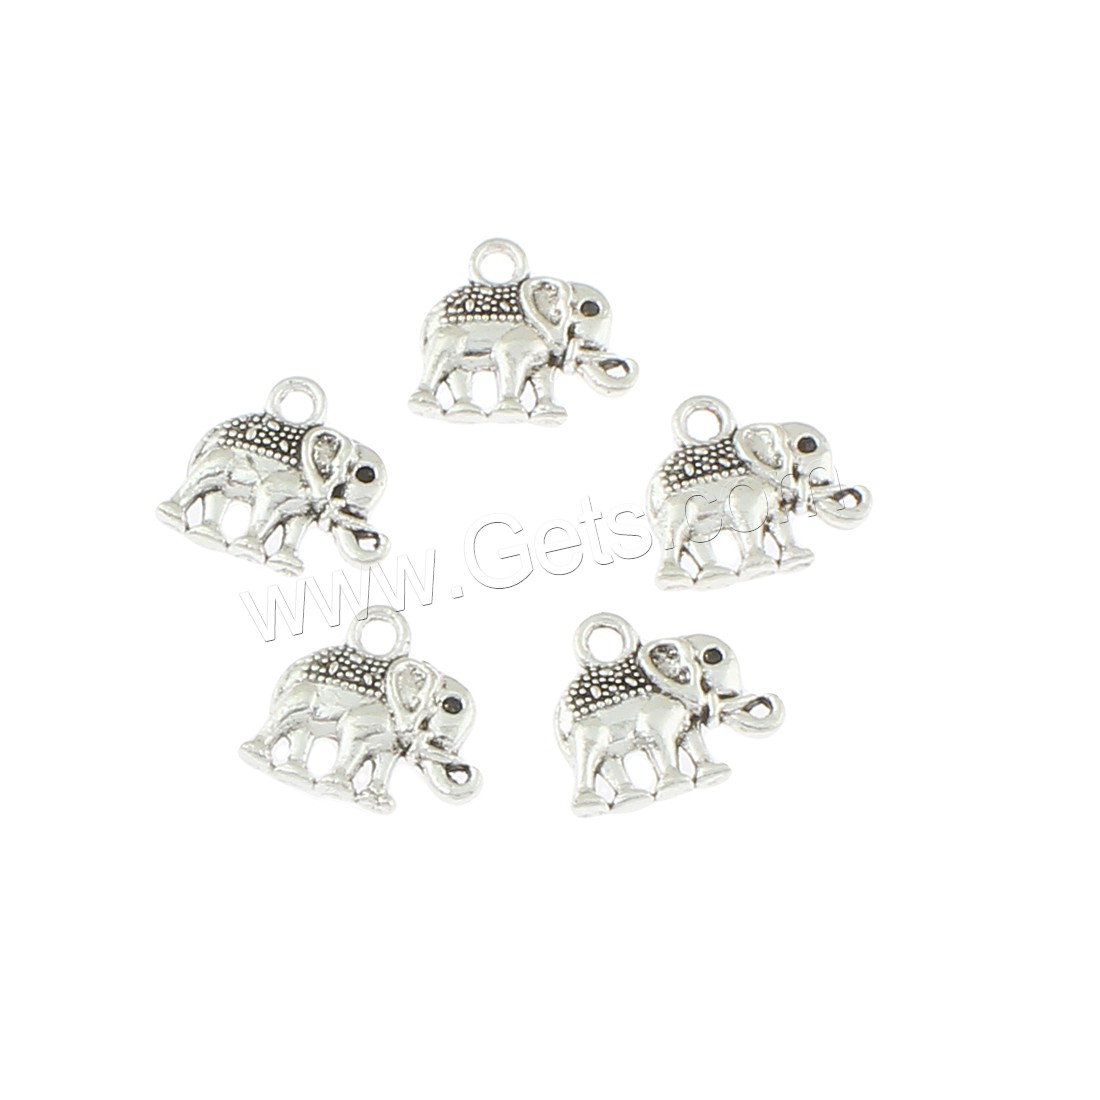 Zinc Alloy Animal Pendants, Elephant, antique silver color plated, 12x13x3mm, Hole:Approx 1mm, Approx 550PCs/Bag, Sold By Bag